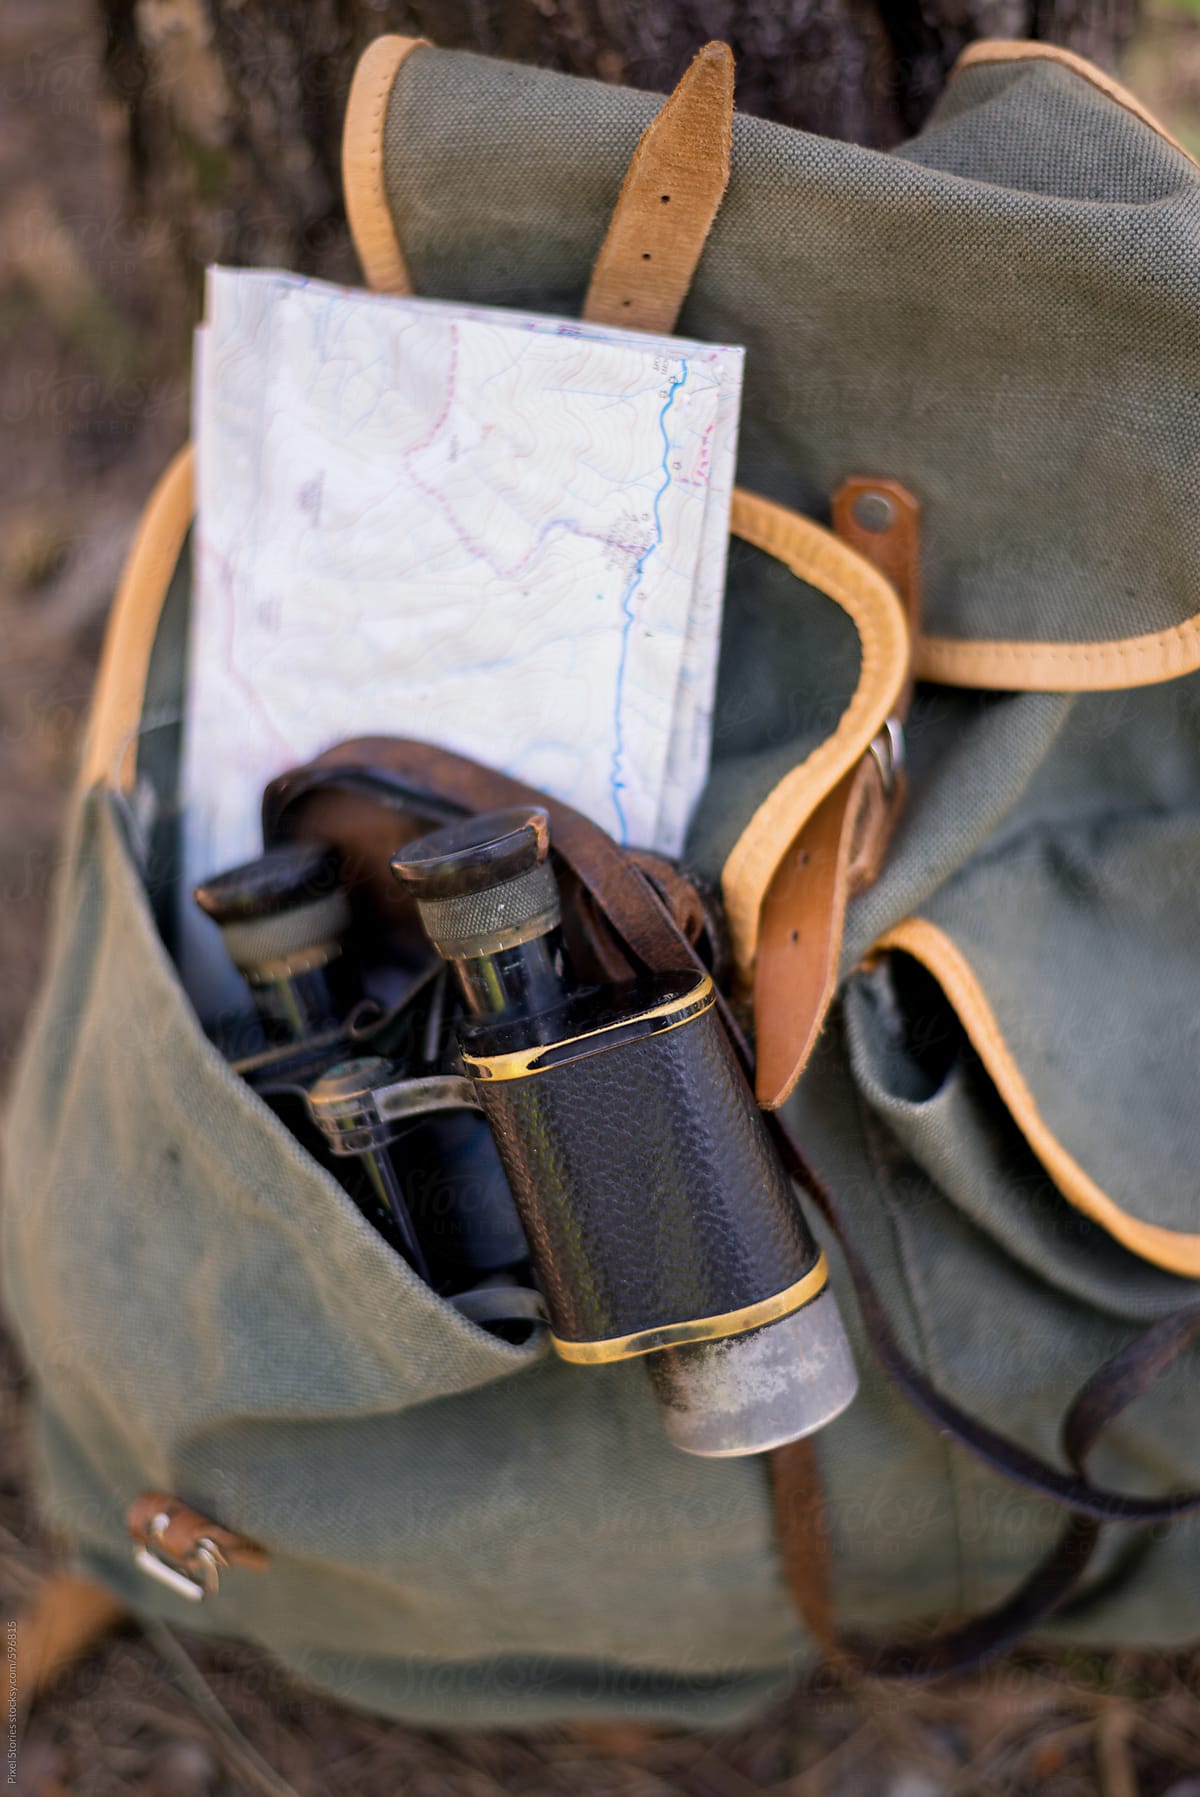 Old binoculars and a map tucked into a backpack